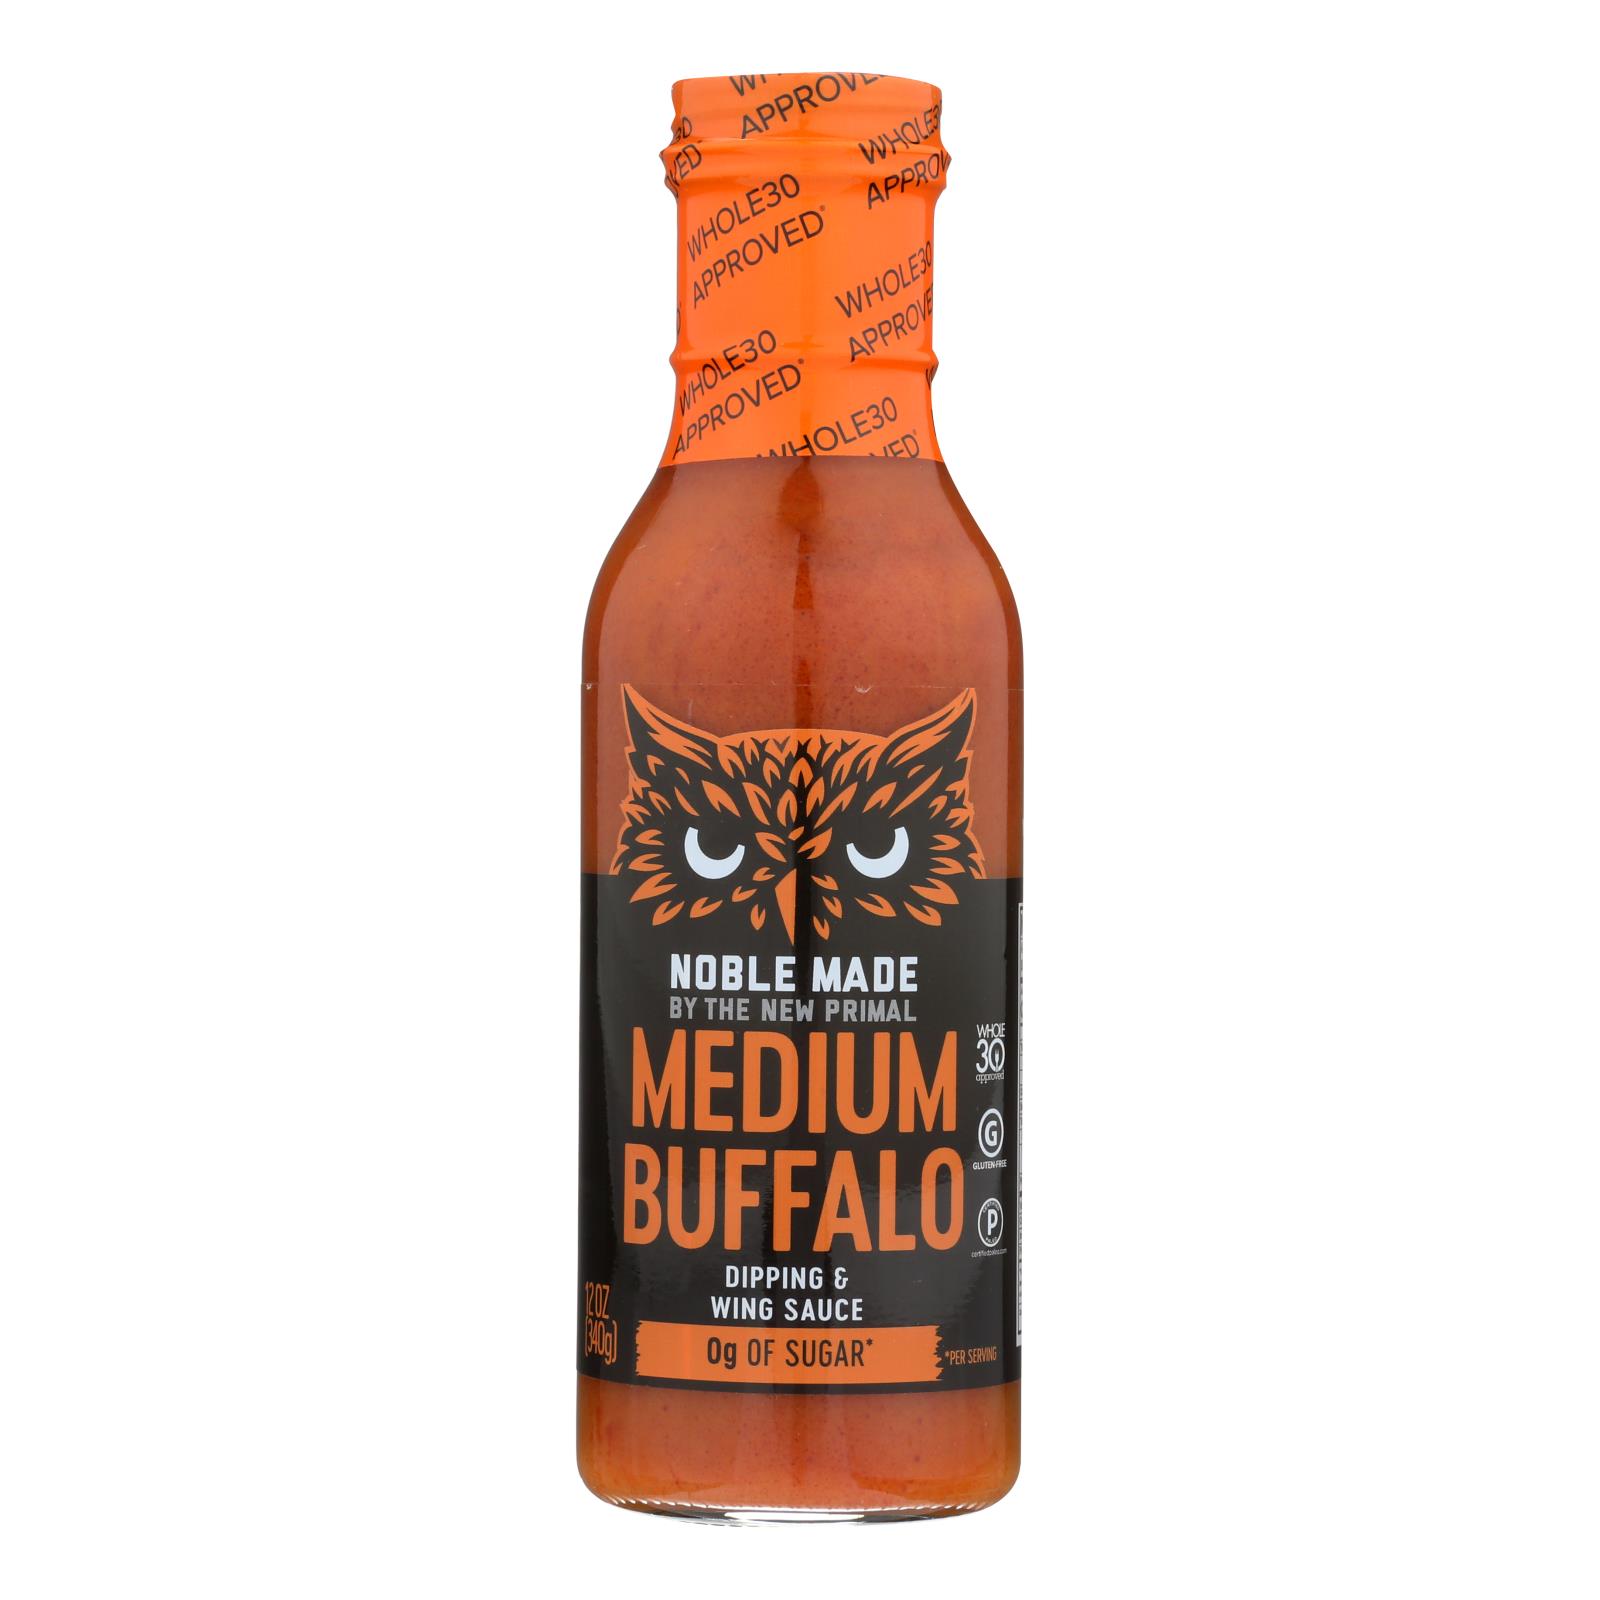 Noble Made By The New Primal Medium Buffalo Dipping & Wing Sauce - 6개 묶음상품 - 12 OZ